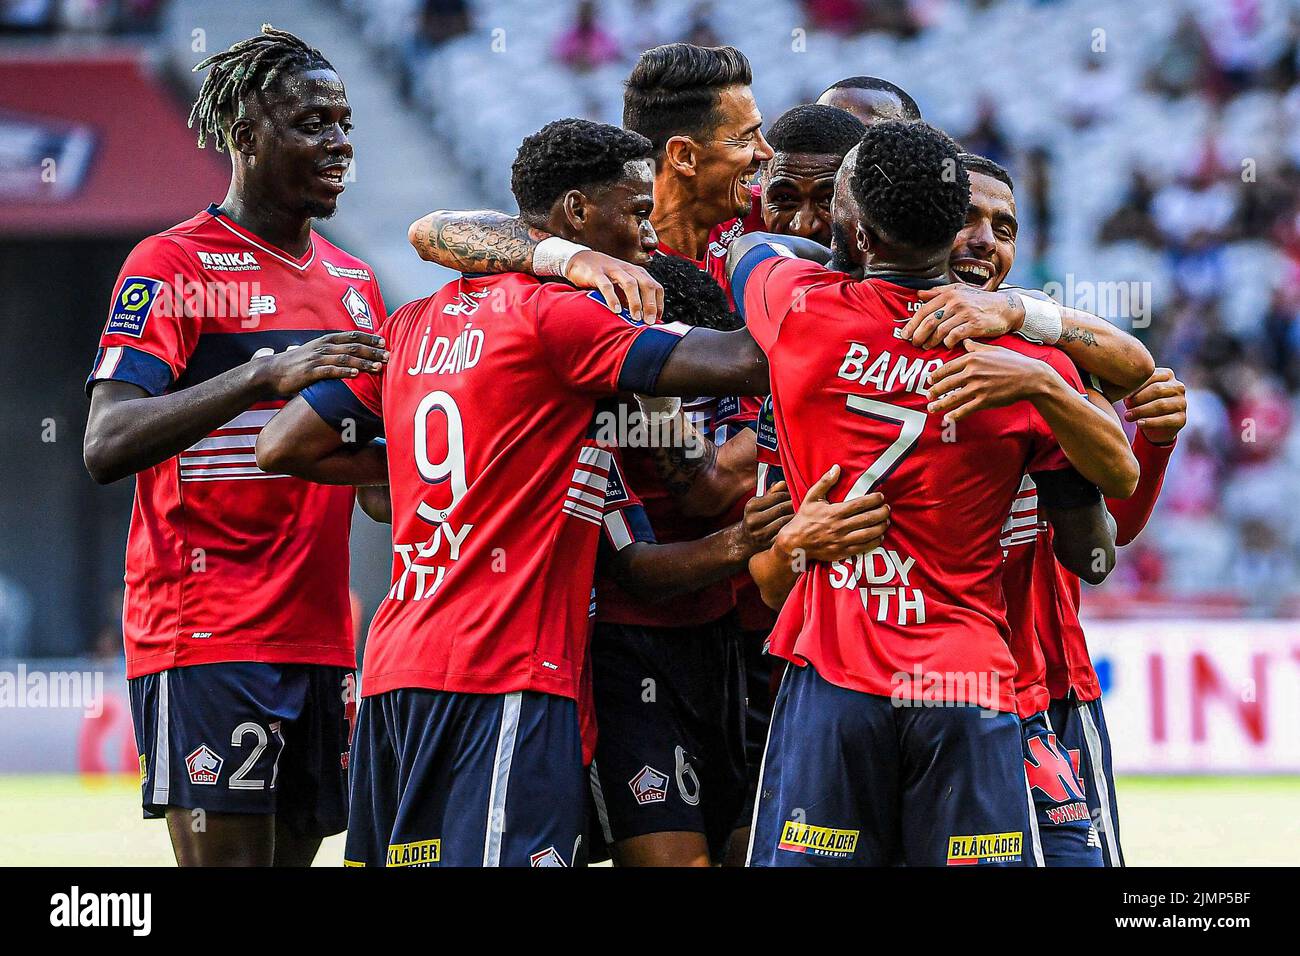 LILLE, FRANCE - AUGUST 7: Jonathan Bamba of Lille, Akim Zedadka of Lille, players of Lille celebrate a goal during the French Ligue 1 match between Lille and Auxerre at Stade Pierre Mauroy on August 7, 2022 in Lille, France (Photo by Matthieu Mirville/Orange Pictures) Stock Photo